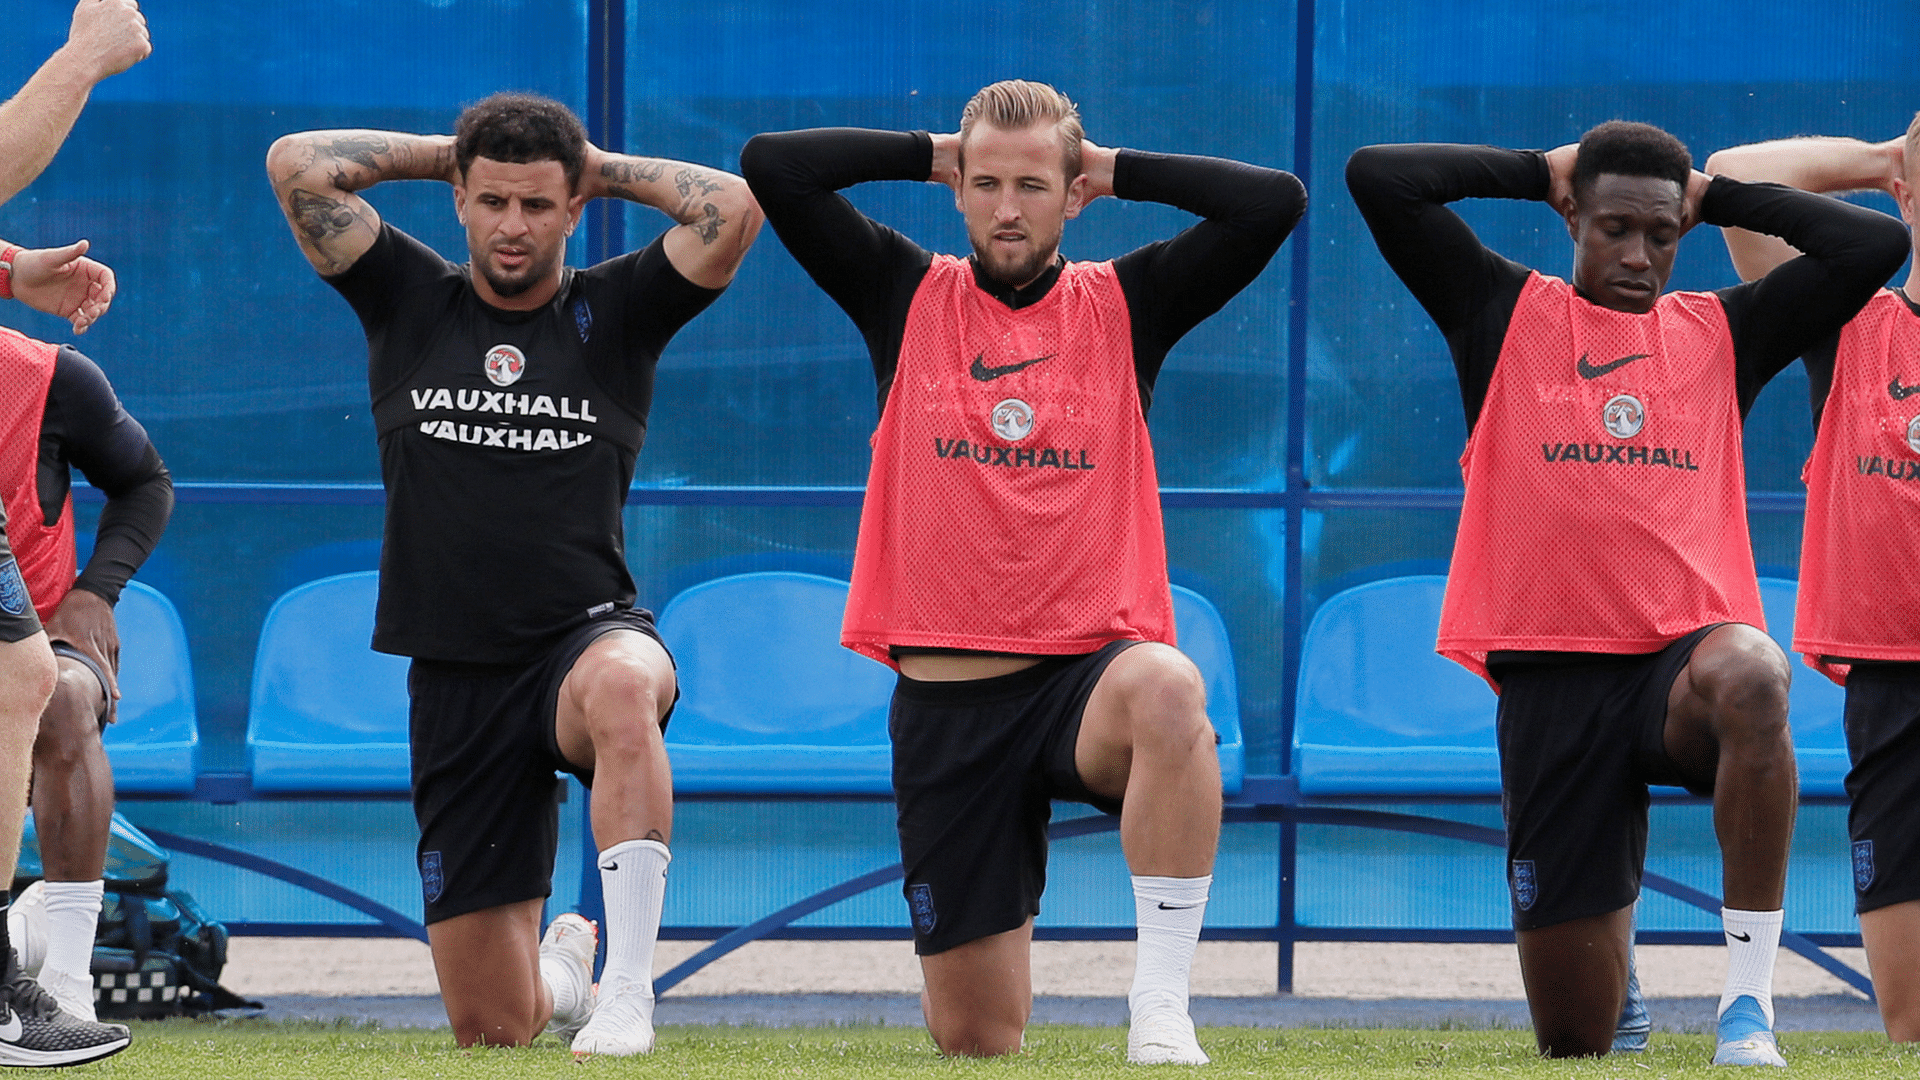 England stars Harry Kane (centre) and Daniel Sturridge (right) will be looking to capitalise on the newfound support.